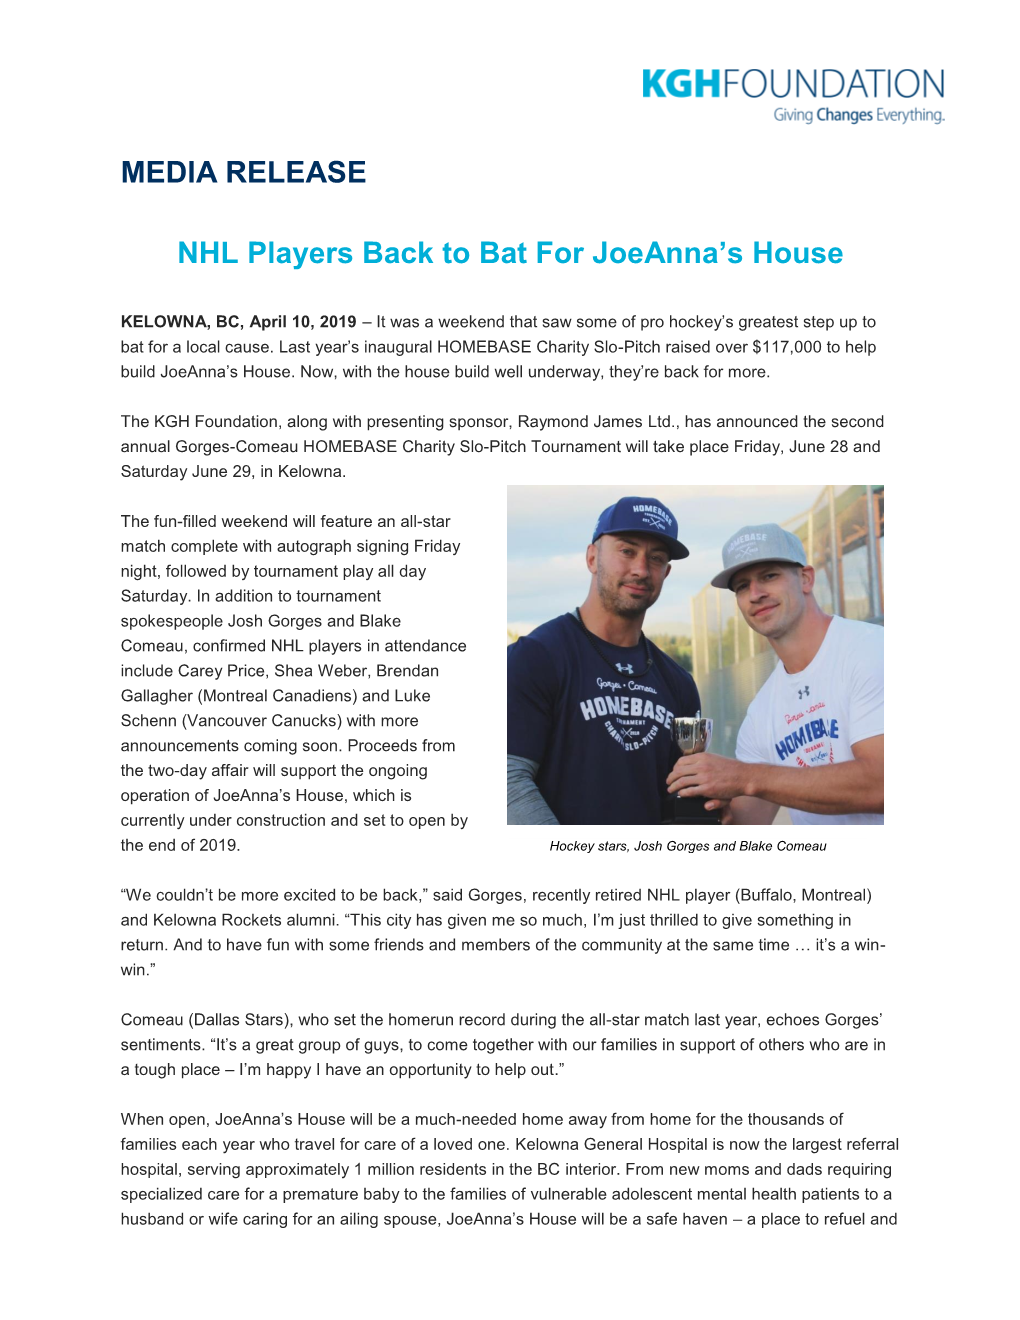 MEDIA RELEASE NHL Players Back to Bat for Joeanna's House